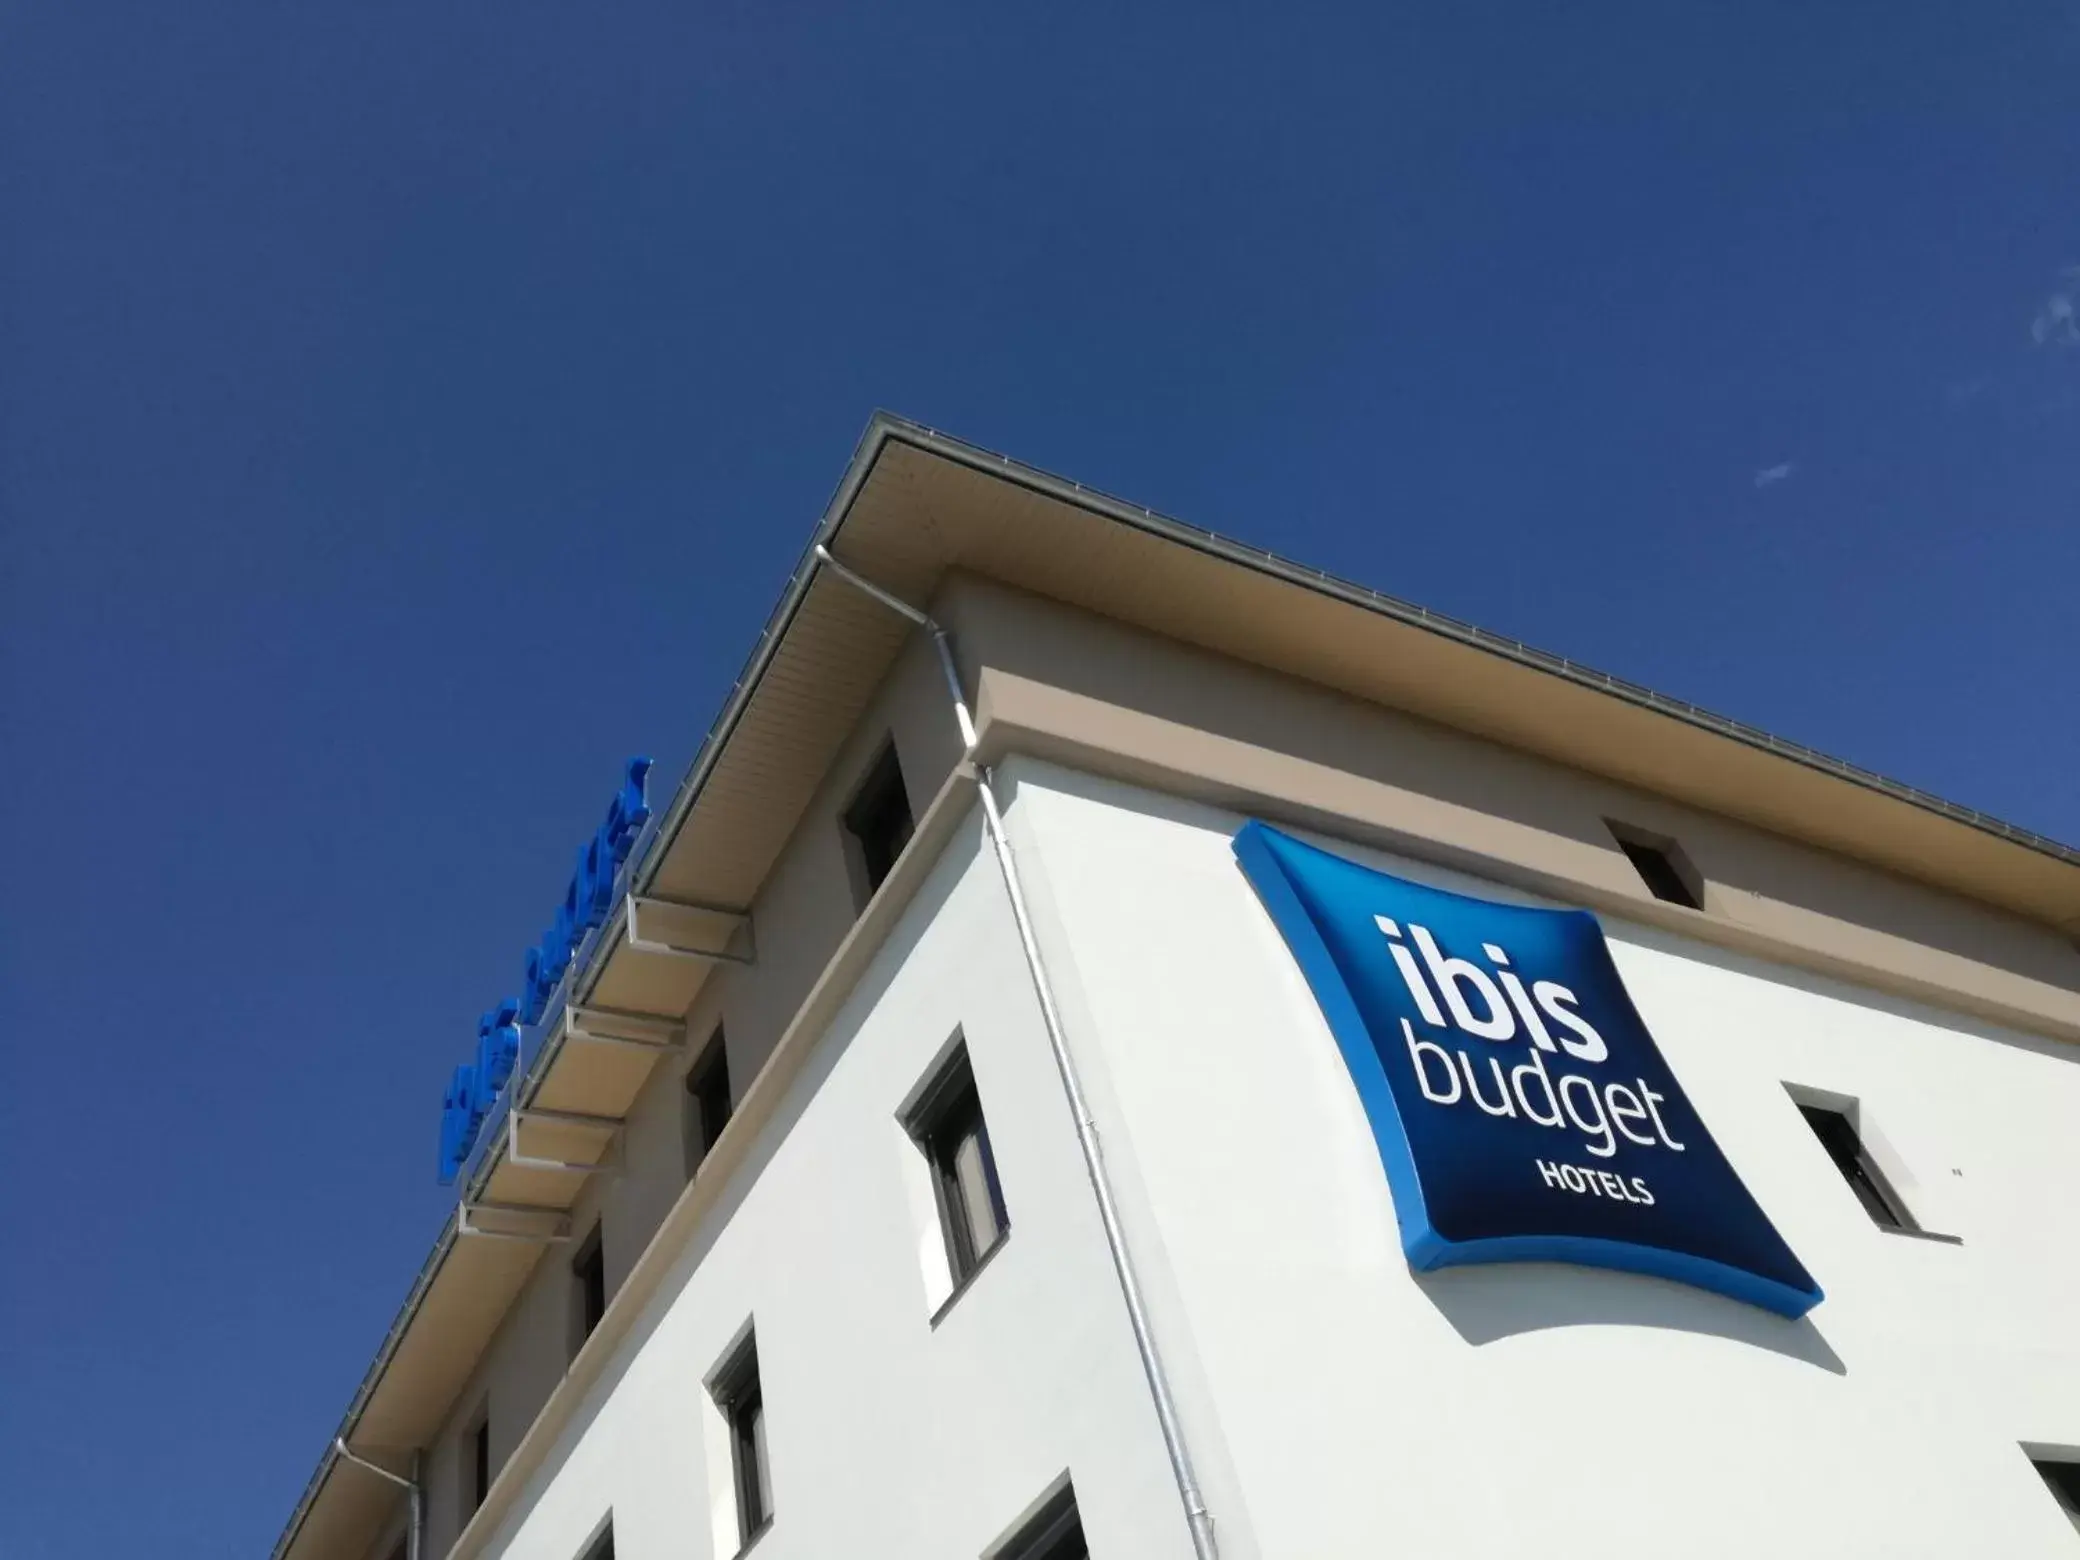 Property logo or sign, Property Building in ibis budget Rennes Rte Lorient